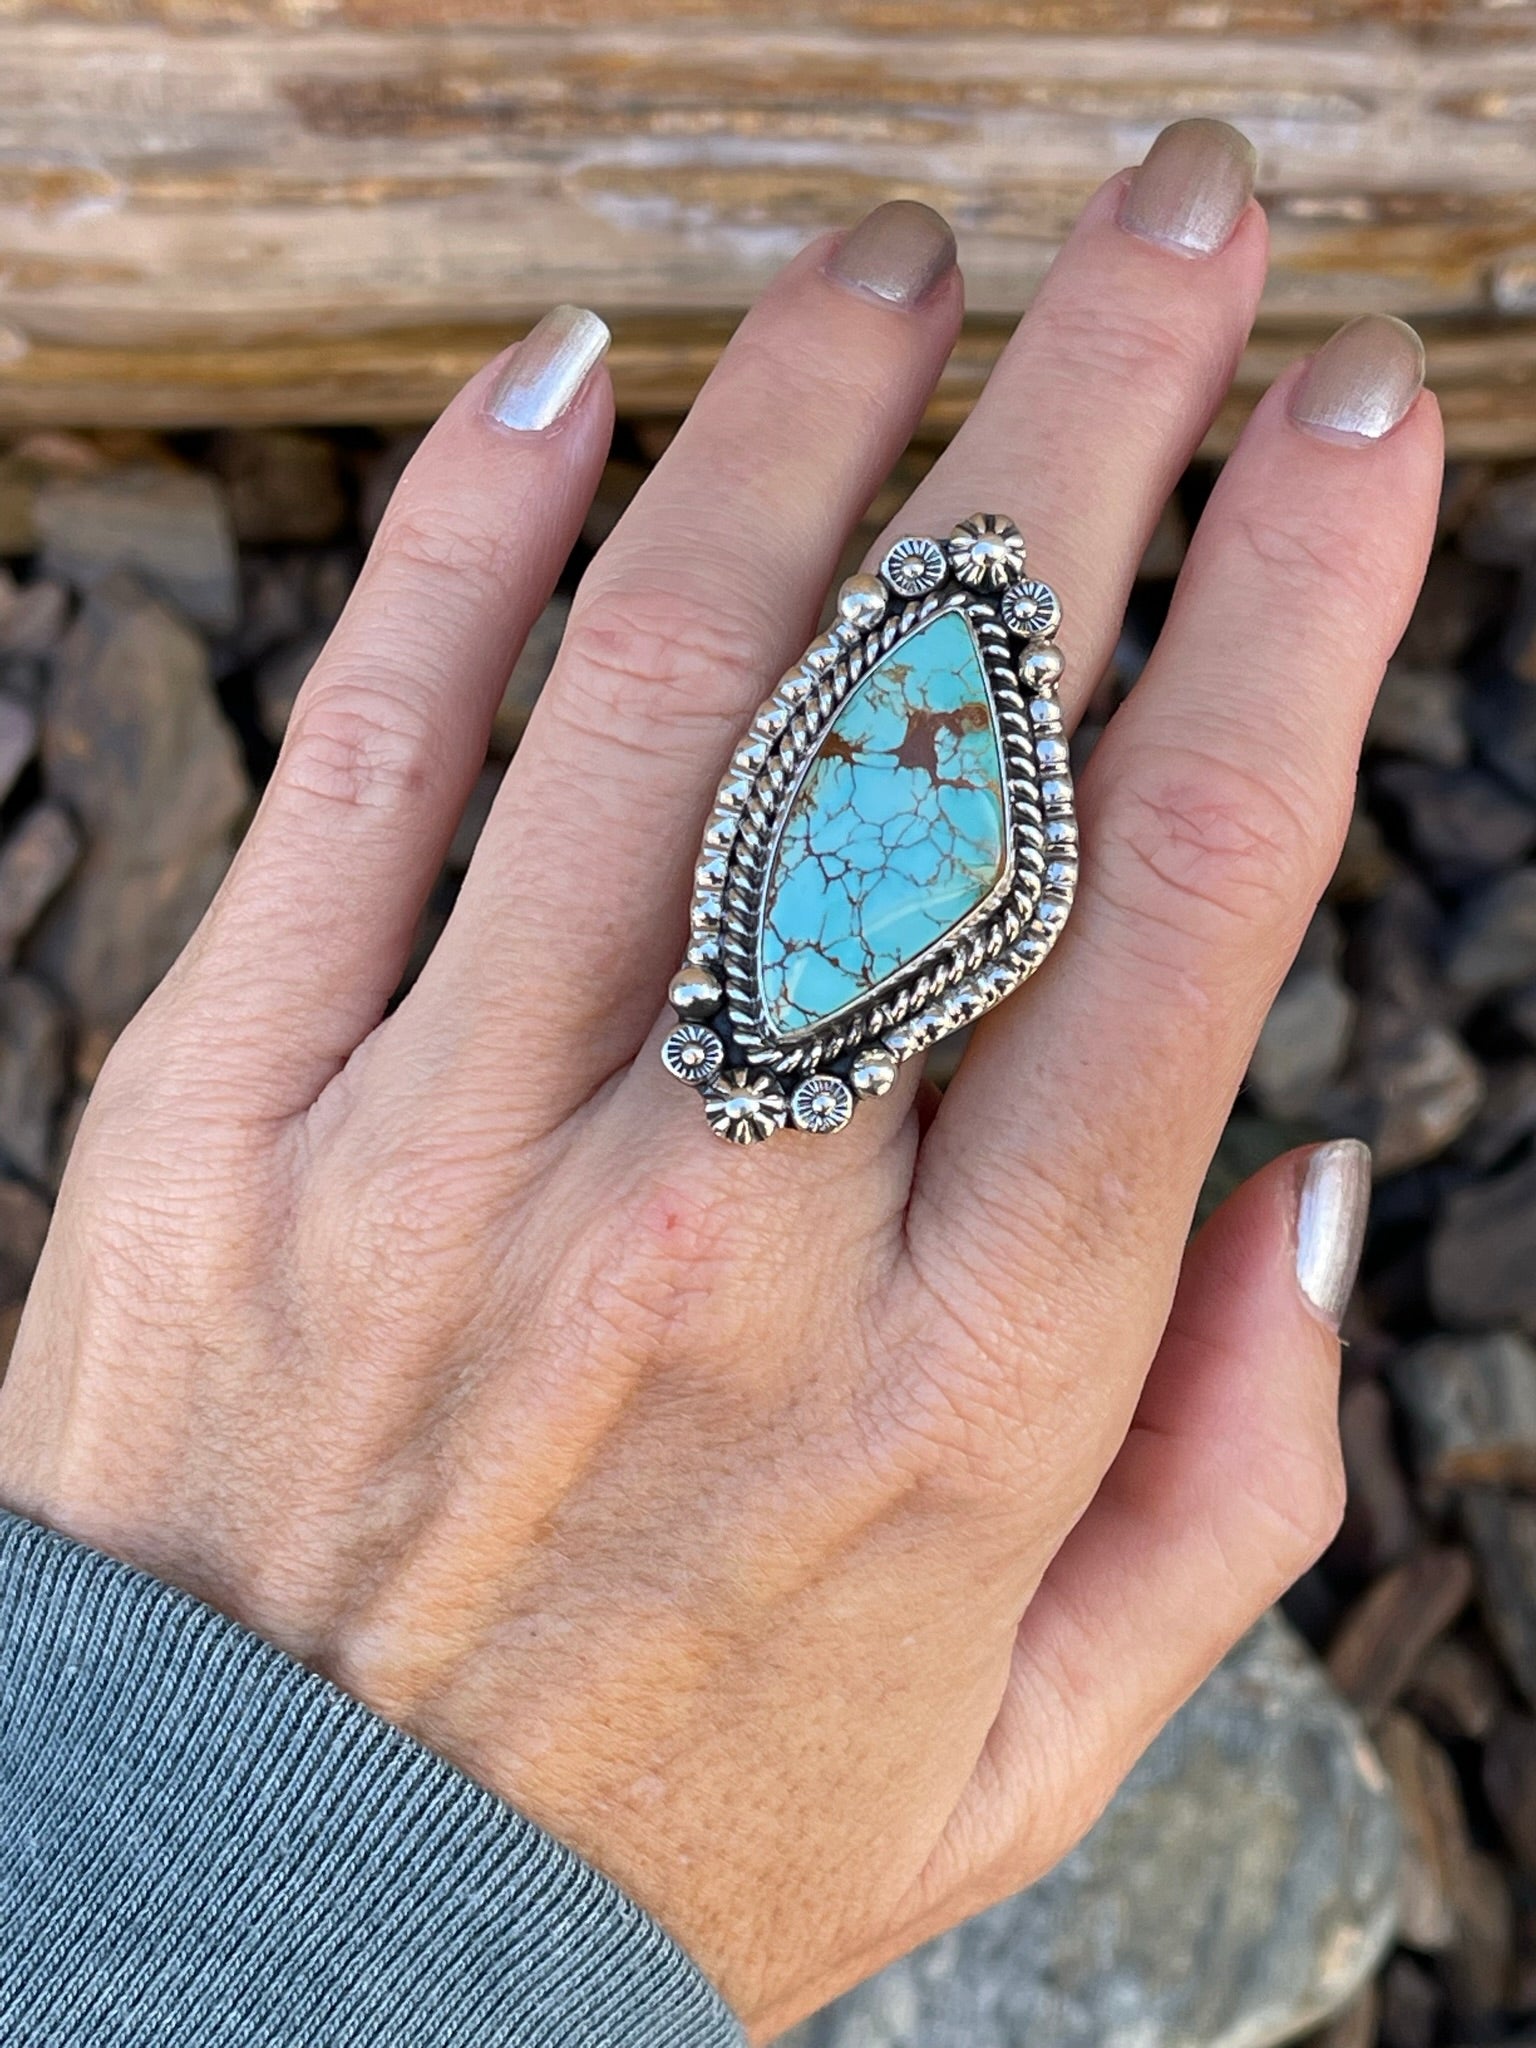 Handmade Sterling Silver Royston Turquoise Ring with Beaded Detail - Size 7 1/2